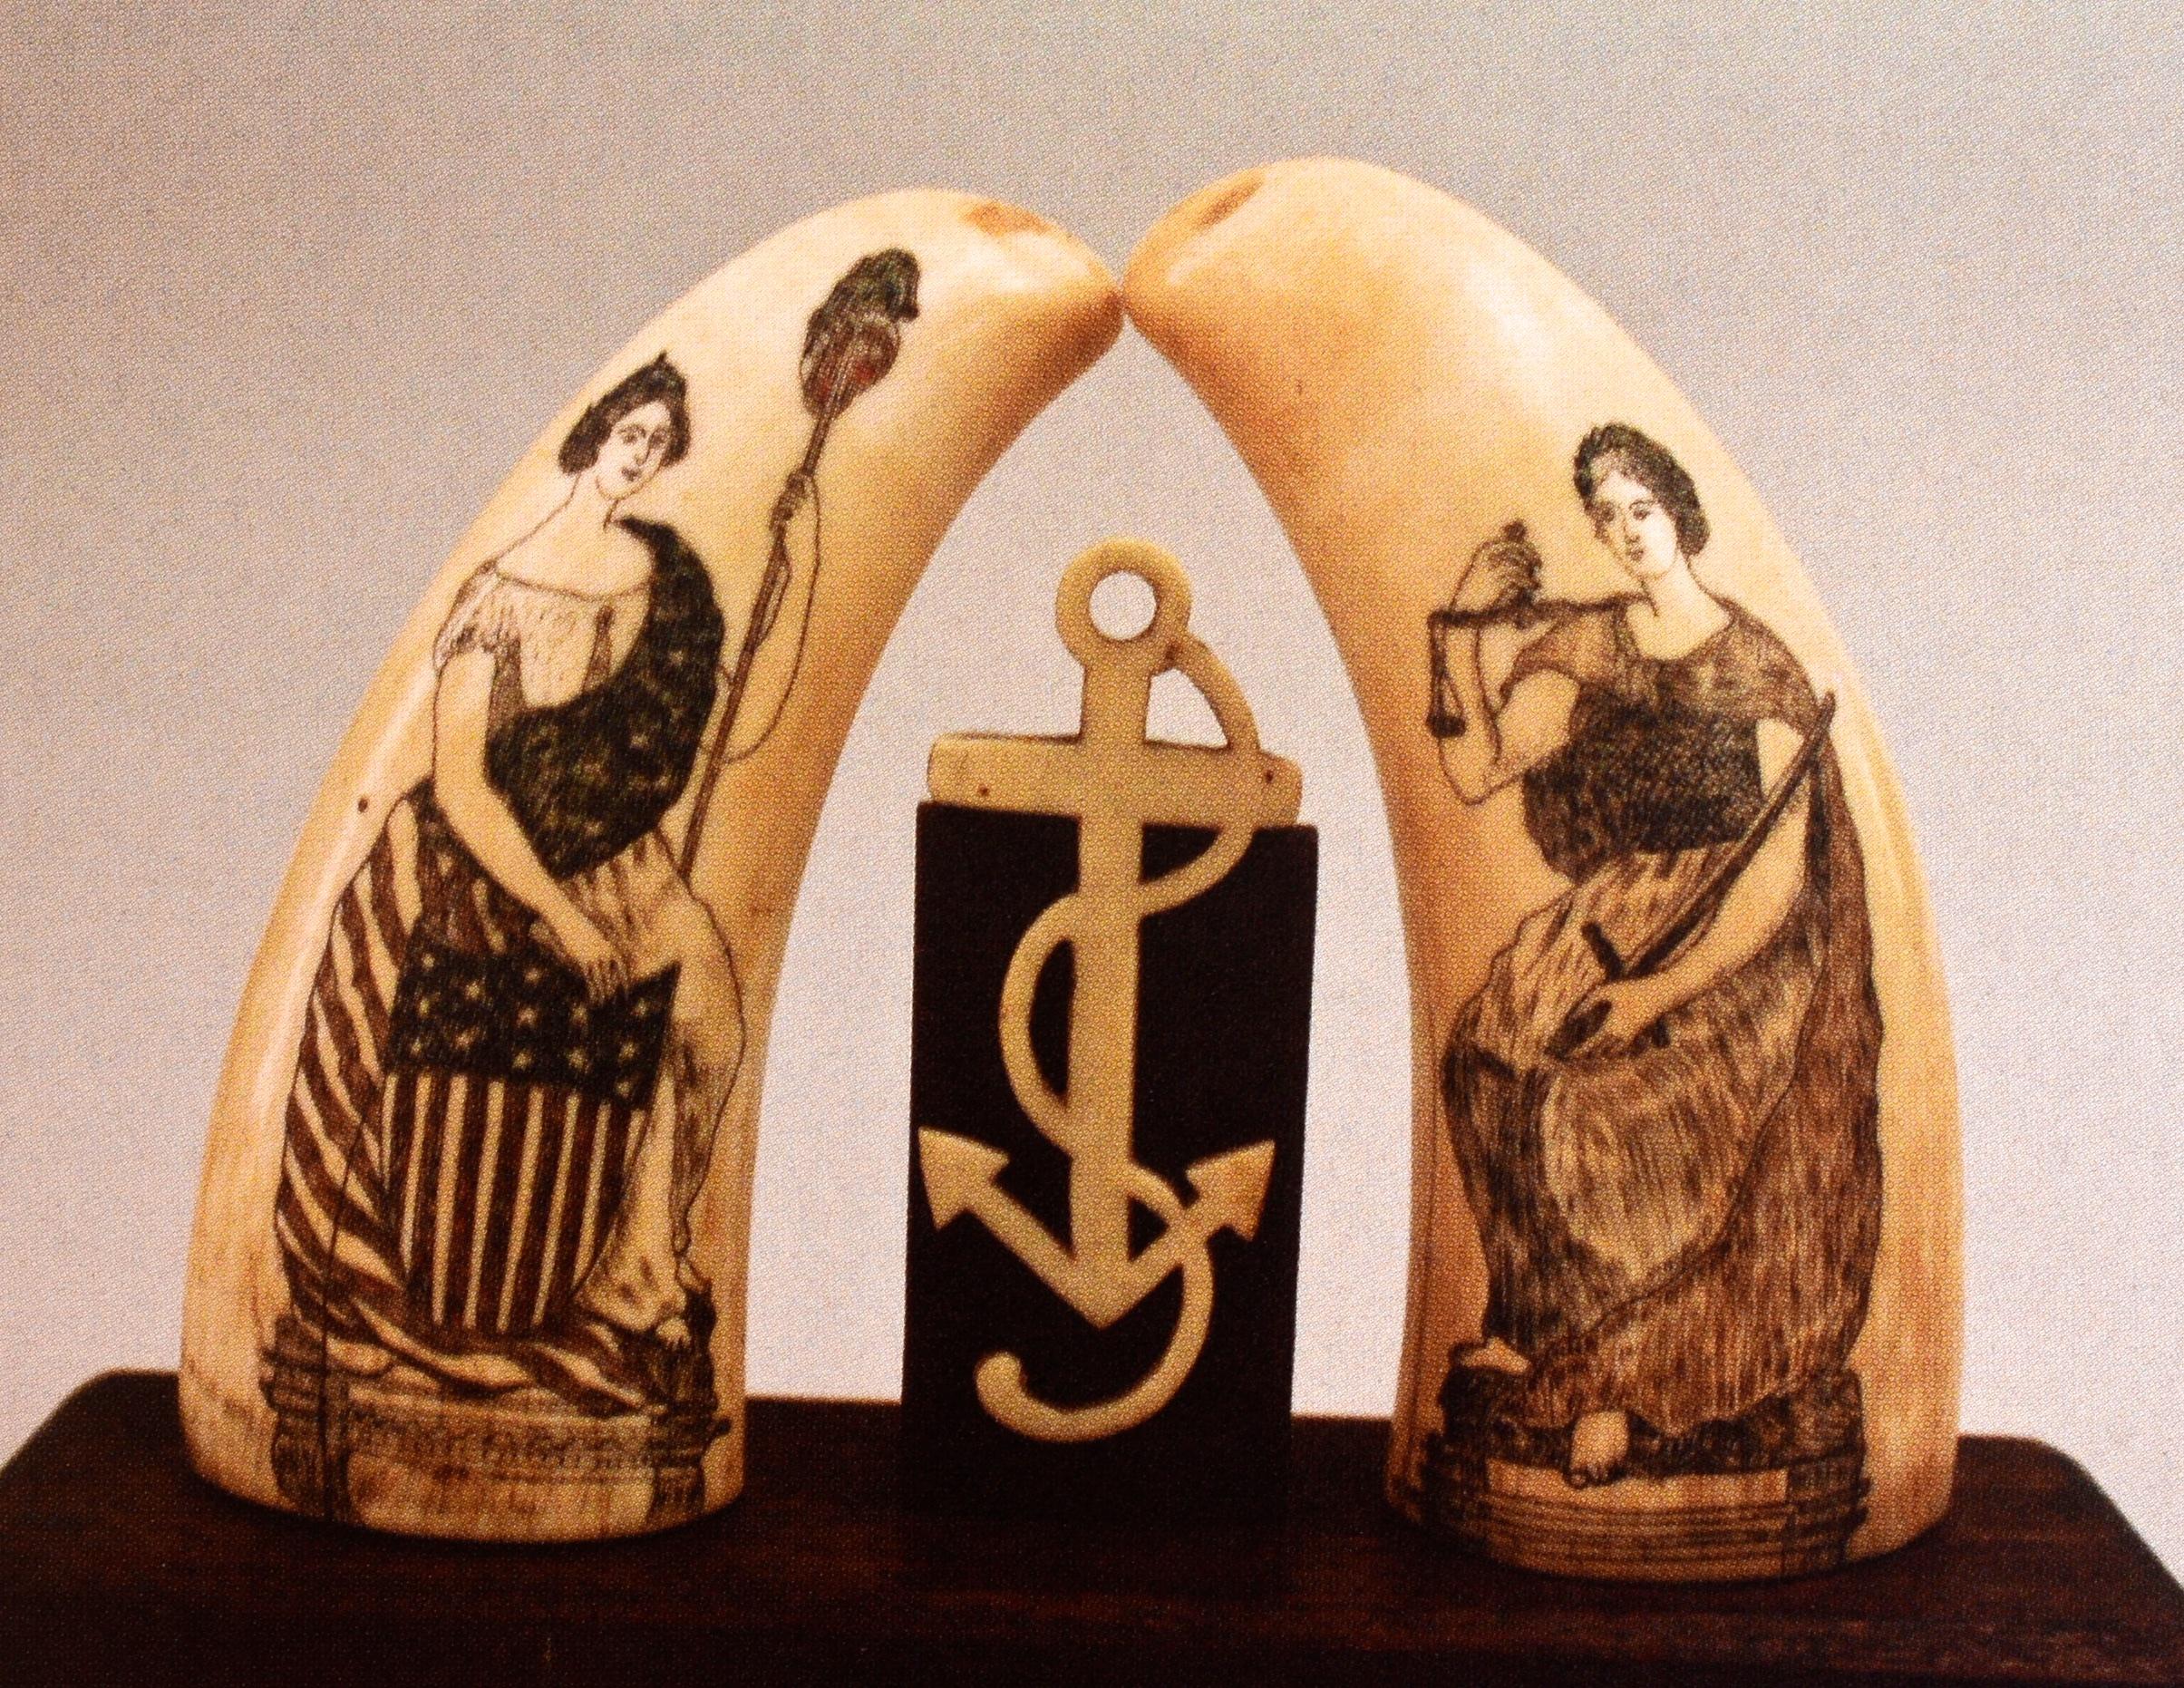 Ingenious Contrivances, Curiously Carved Scrimshaw, New Bedford Whaling Museum For Sale 13